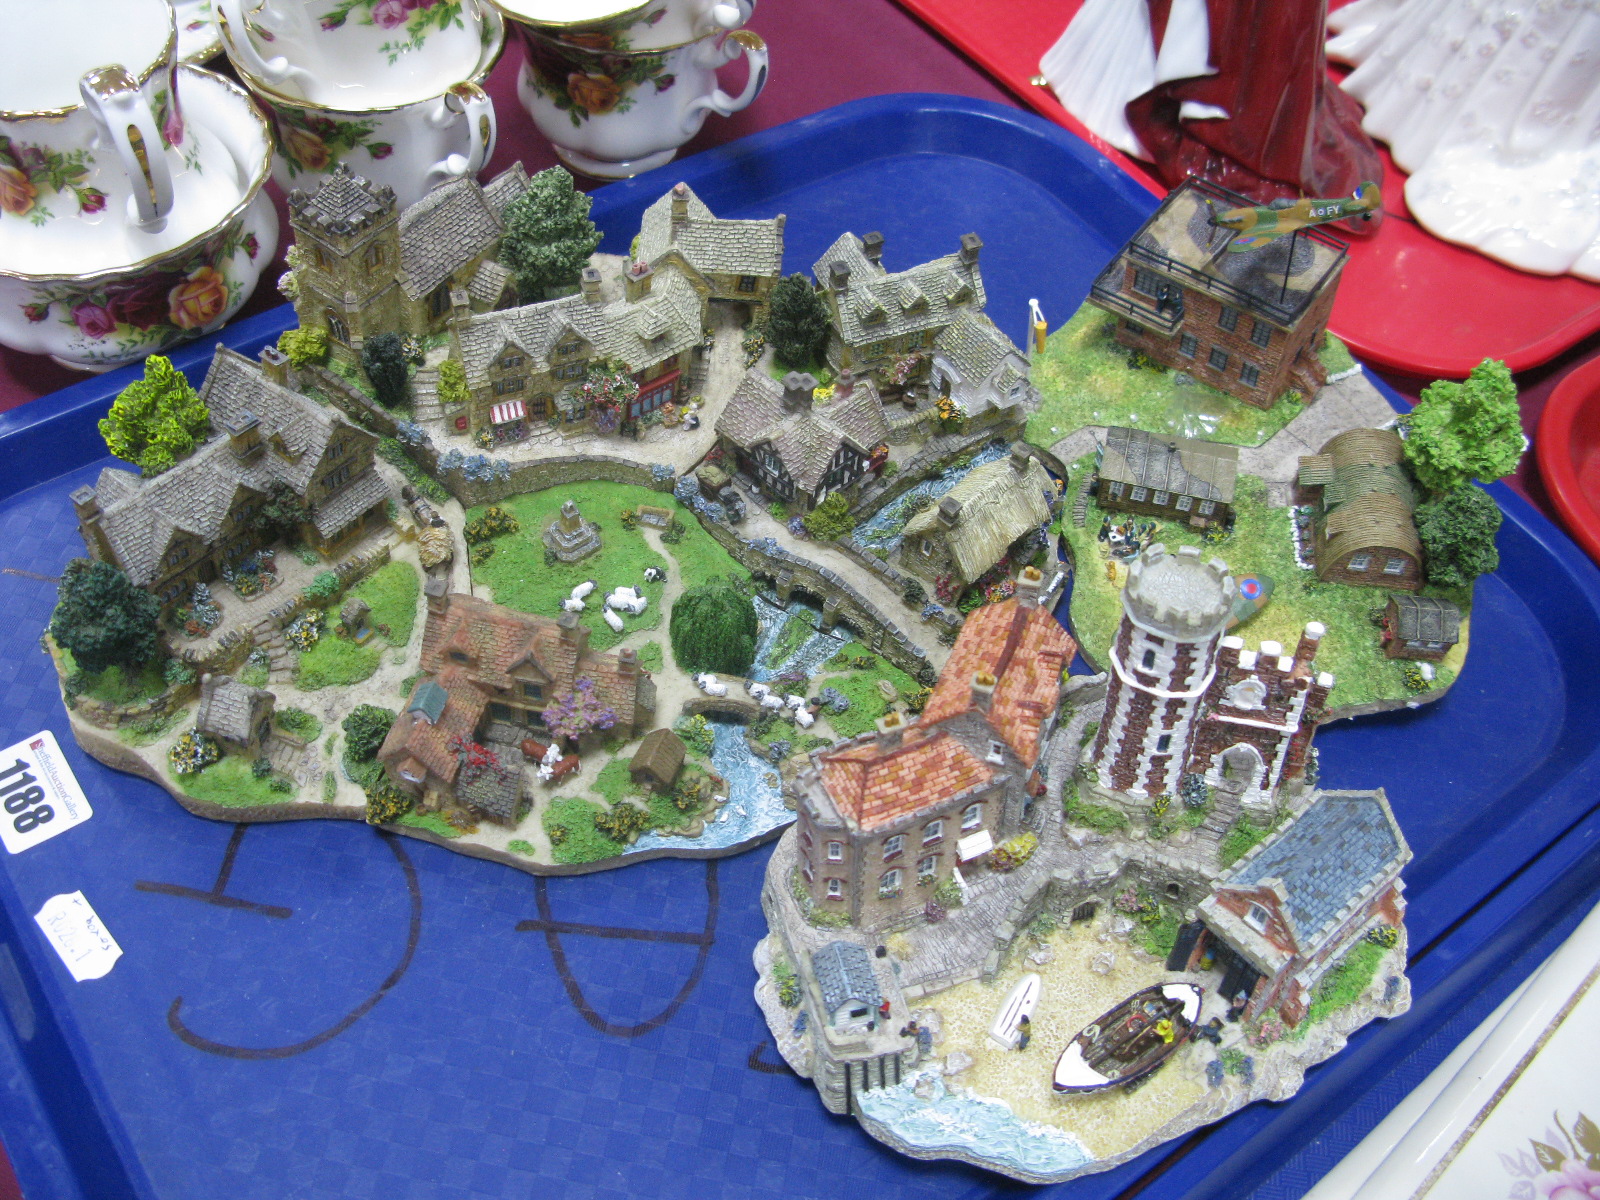 A Four Section 'Cotswold Village', Danbury Mint Resin Model by Jane Hart (all Boxed); 'A Safe